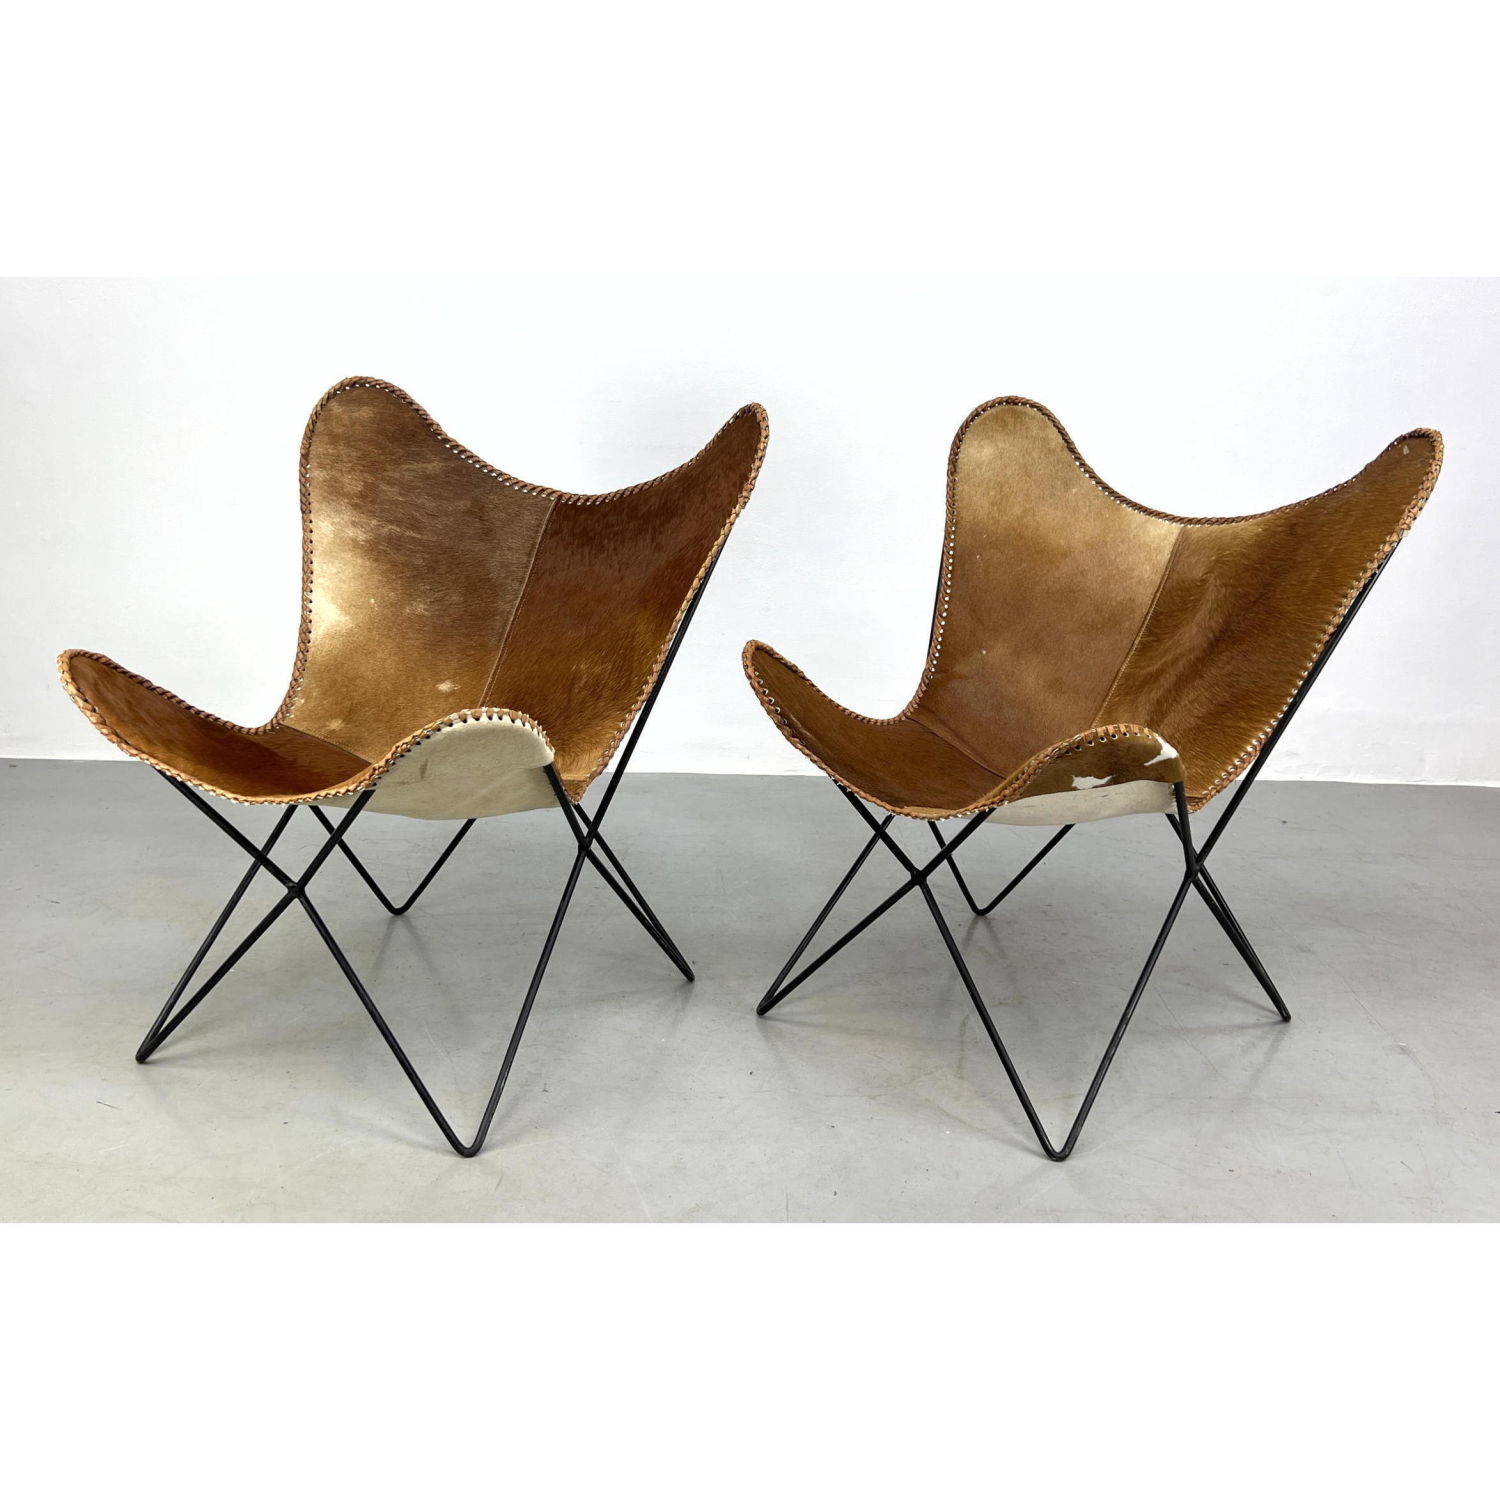 Pair of butterfly chairs with cowhide